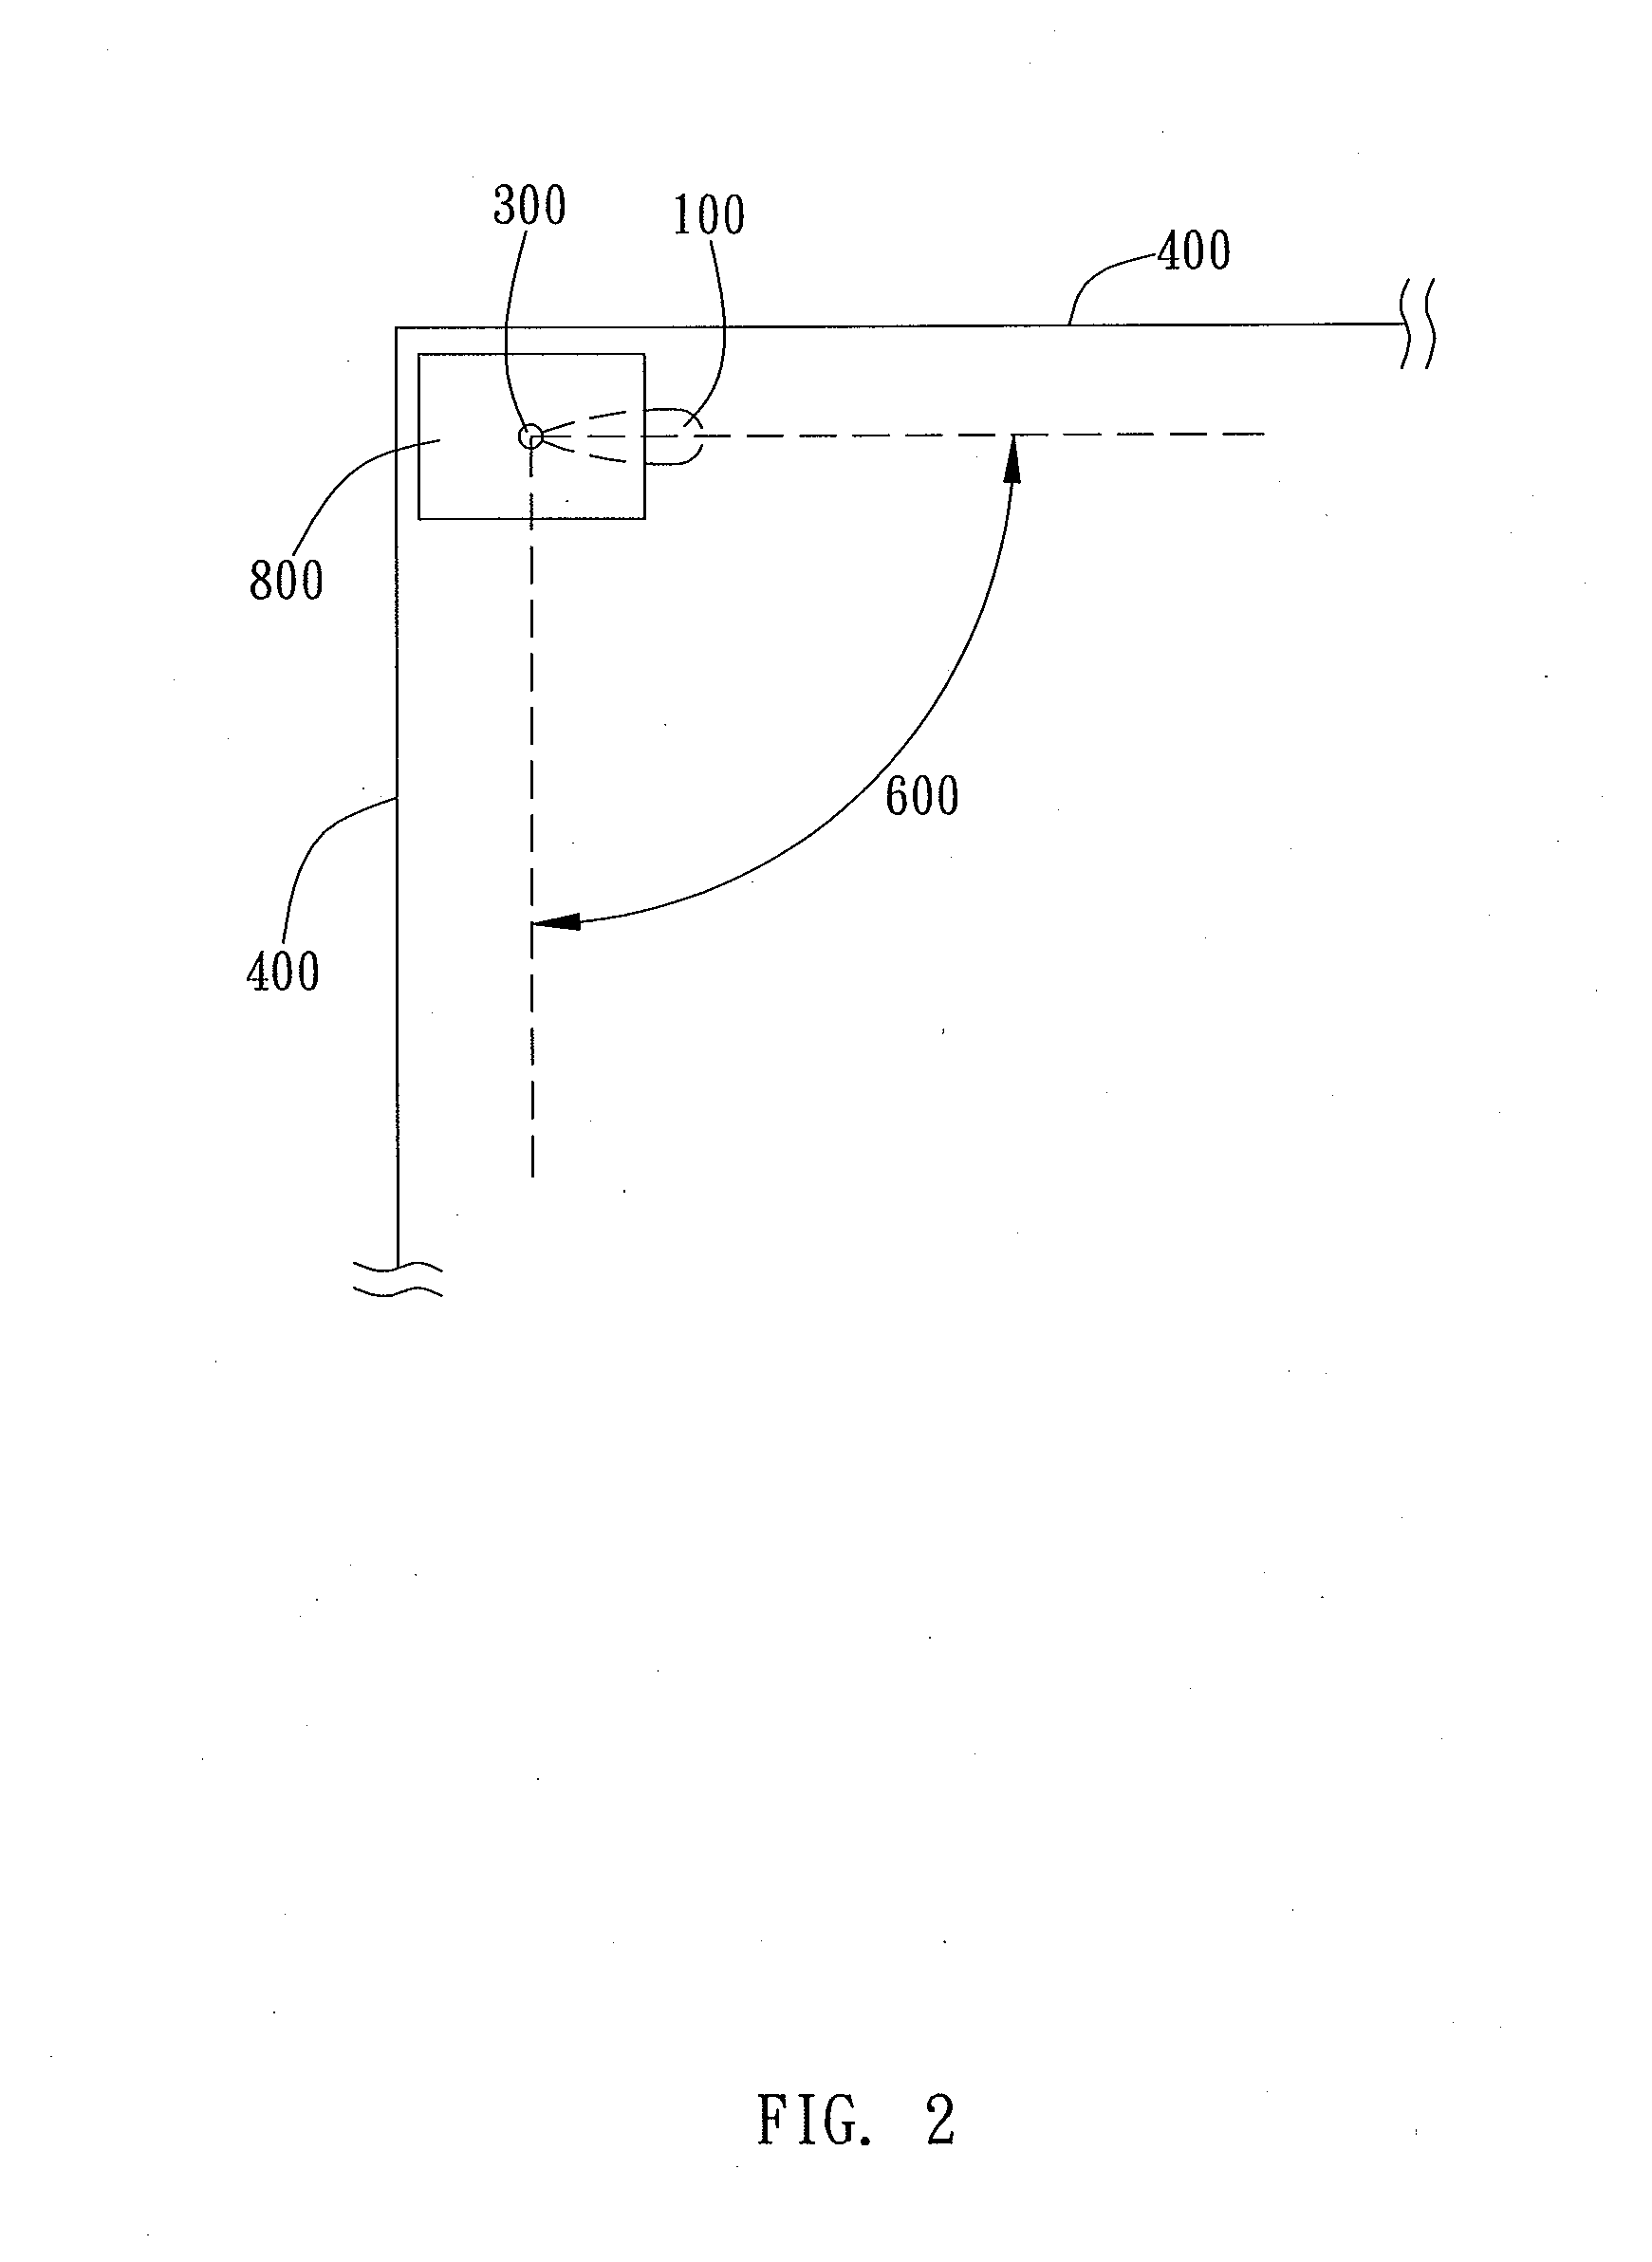 Antenna control method and antenna device using the same